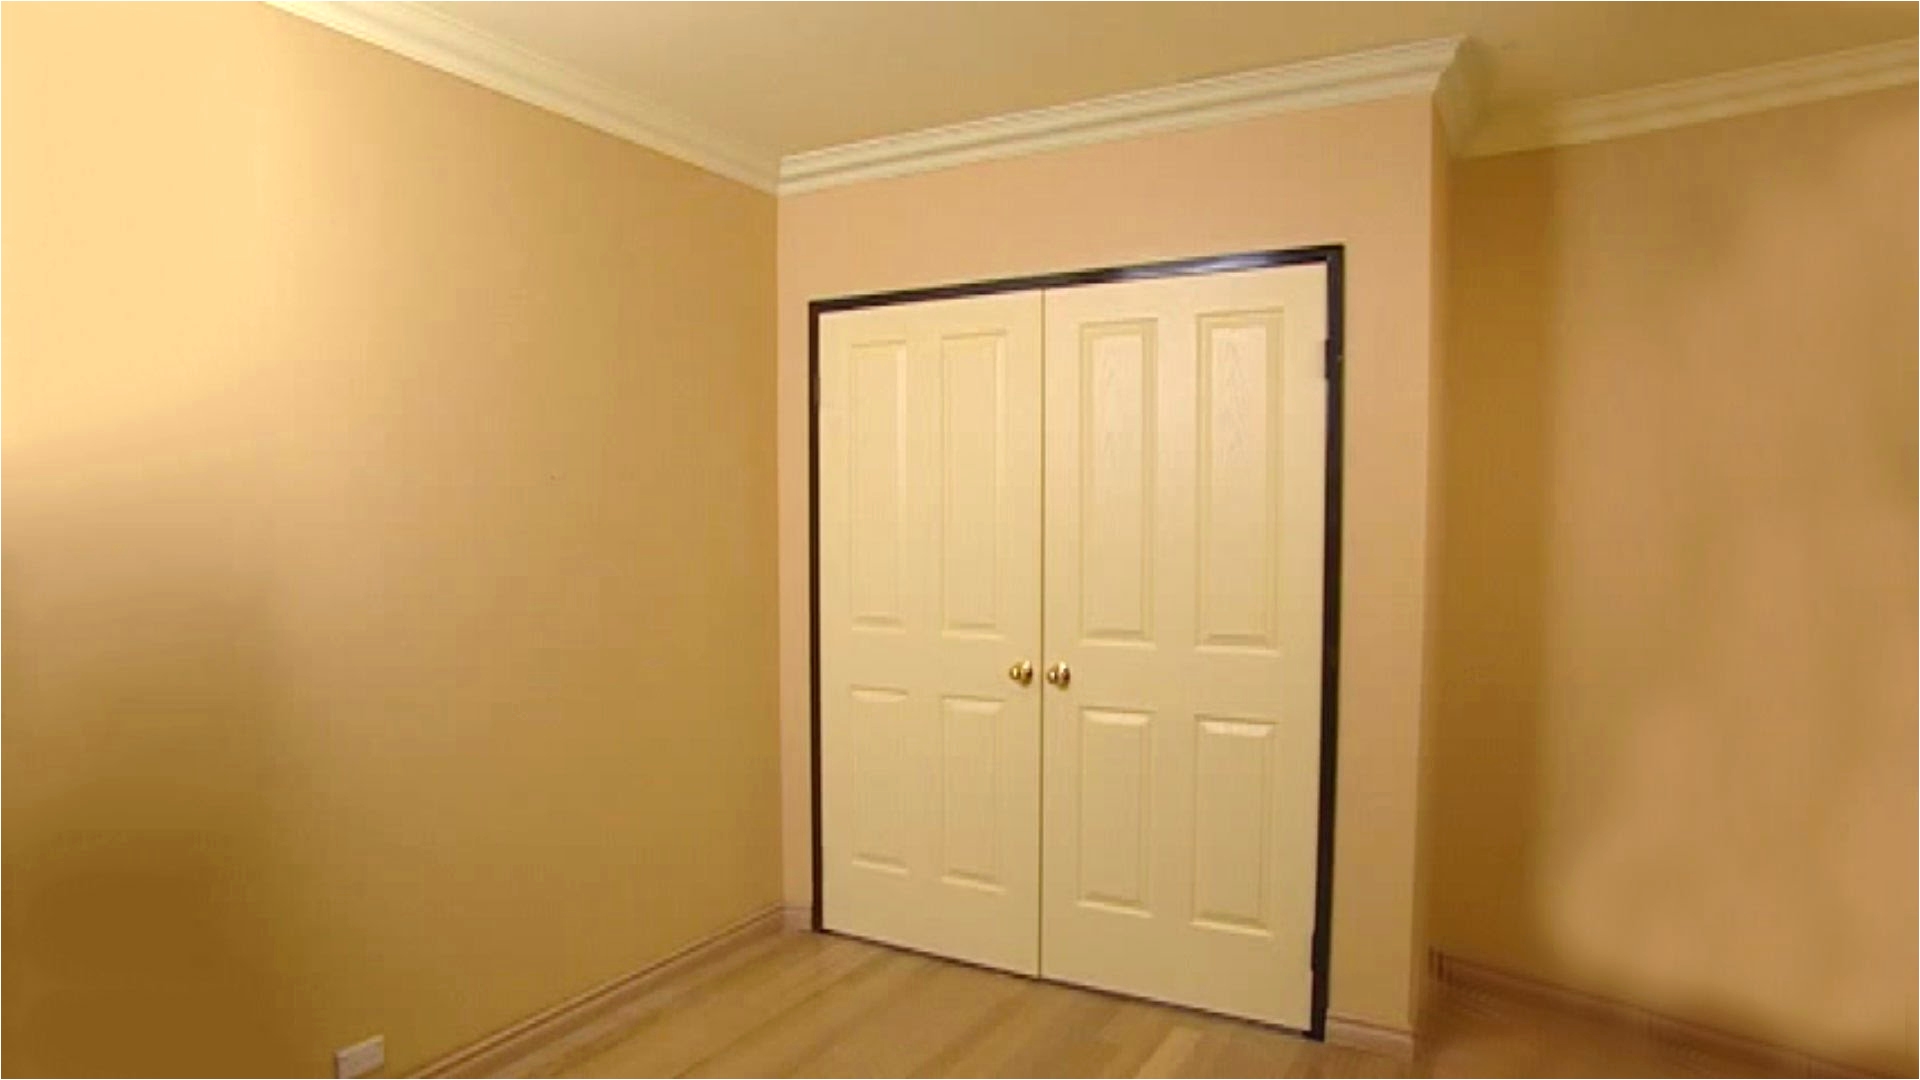 36 x 96 interior door image source pinterest com y wardrobe how to build fitted wardrobes i 0d